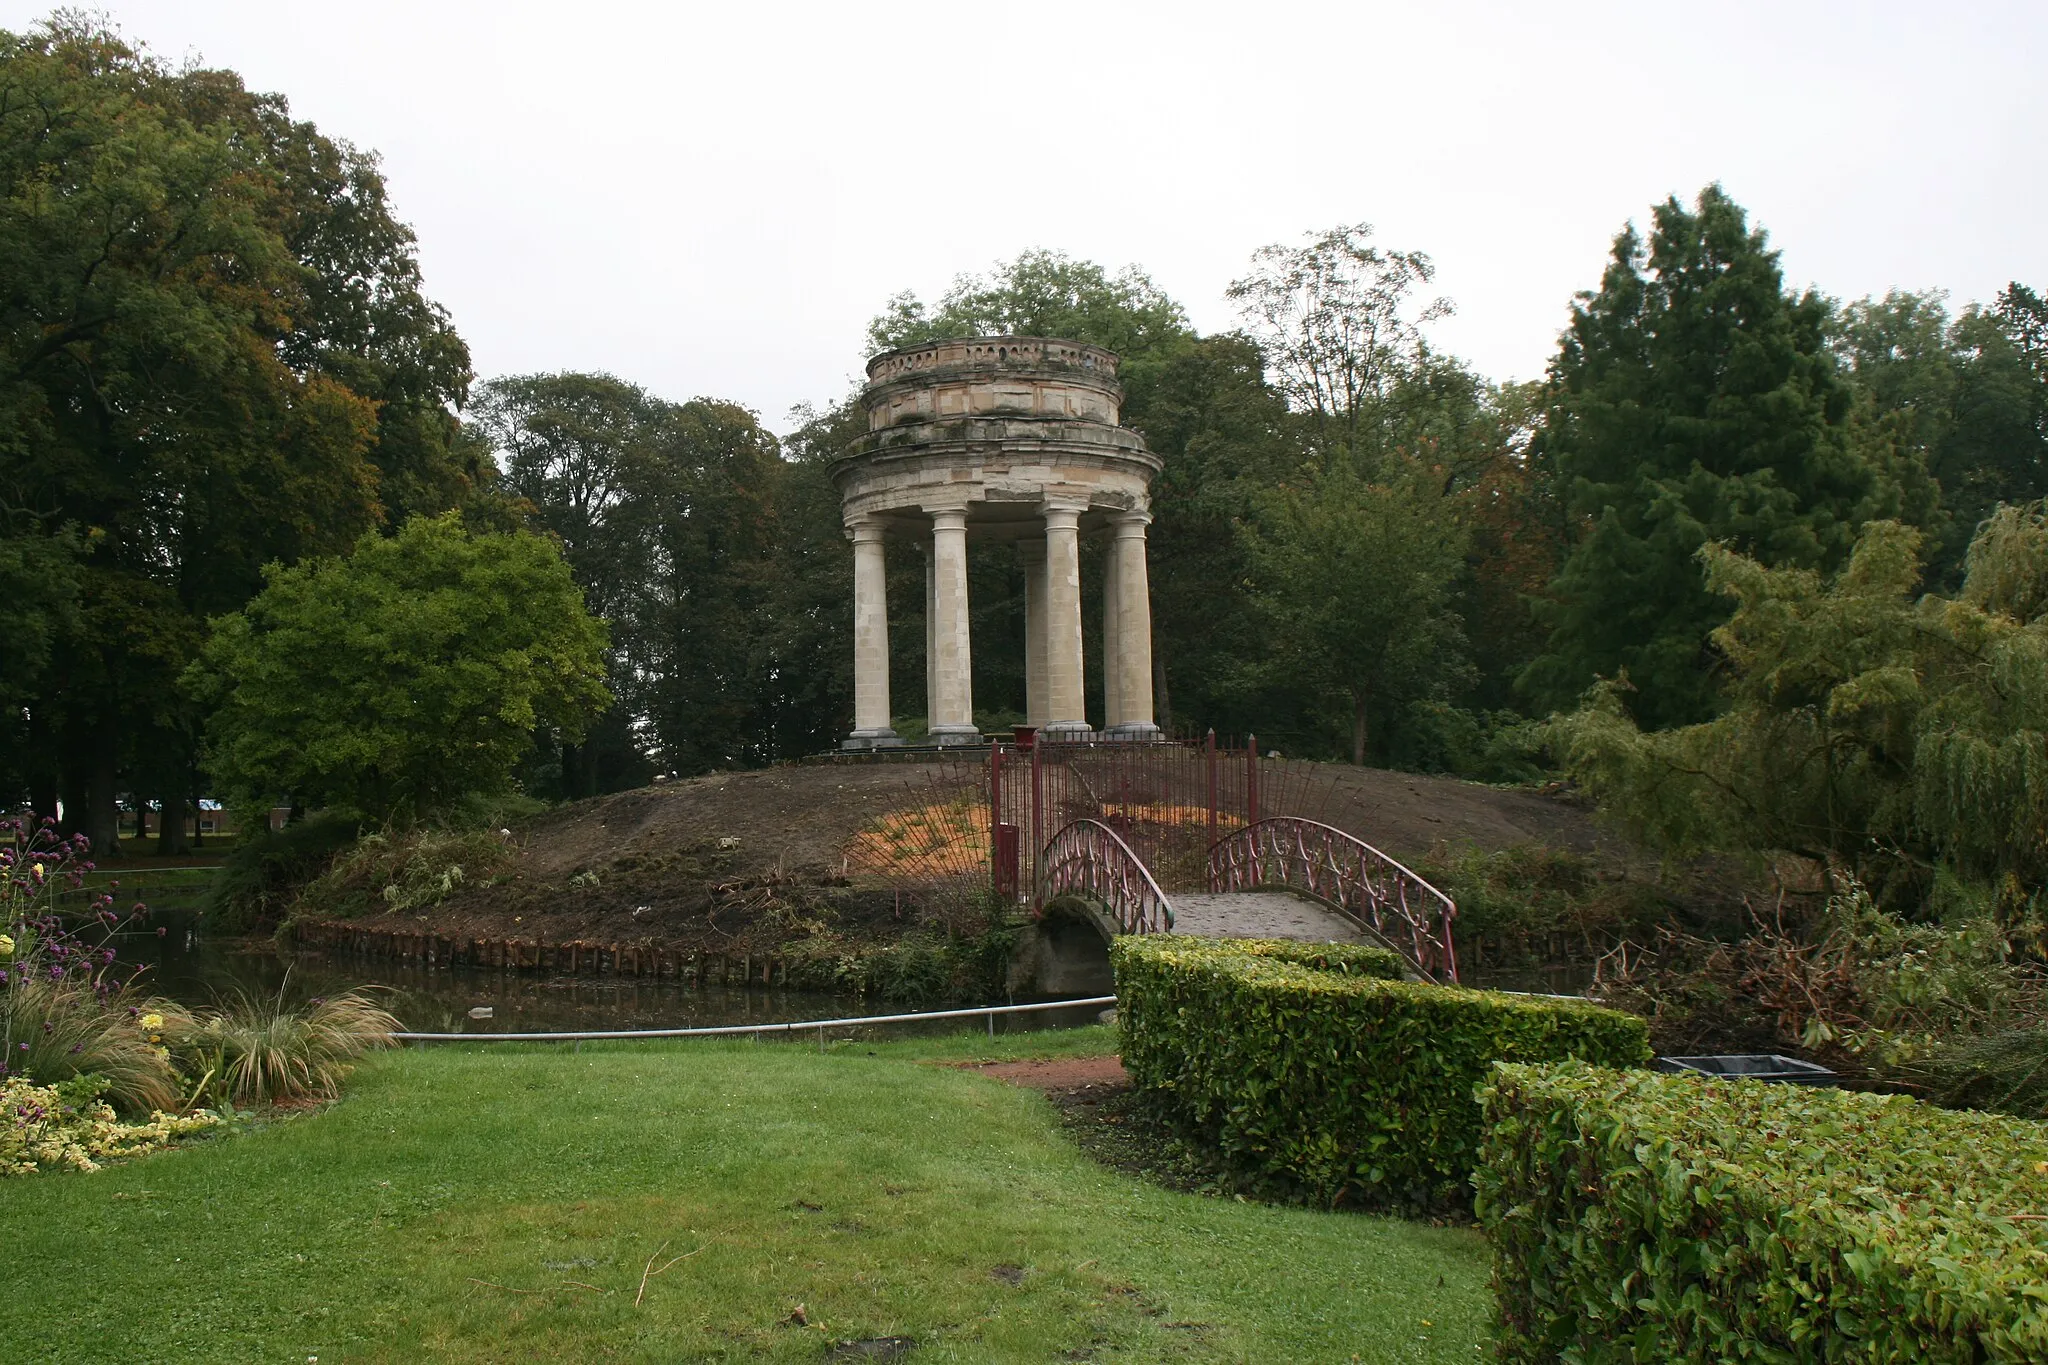 Photo showing: "Temple of love" (le temple de l'amour) located in the Joliot-Curie park. 3 buildings of this type exist in France. One is located in the Chateau de Versailles, near the Petit Trianon, and the other one is located in Paris, in the Buttes-Chaumont park.